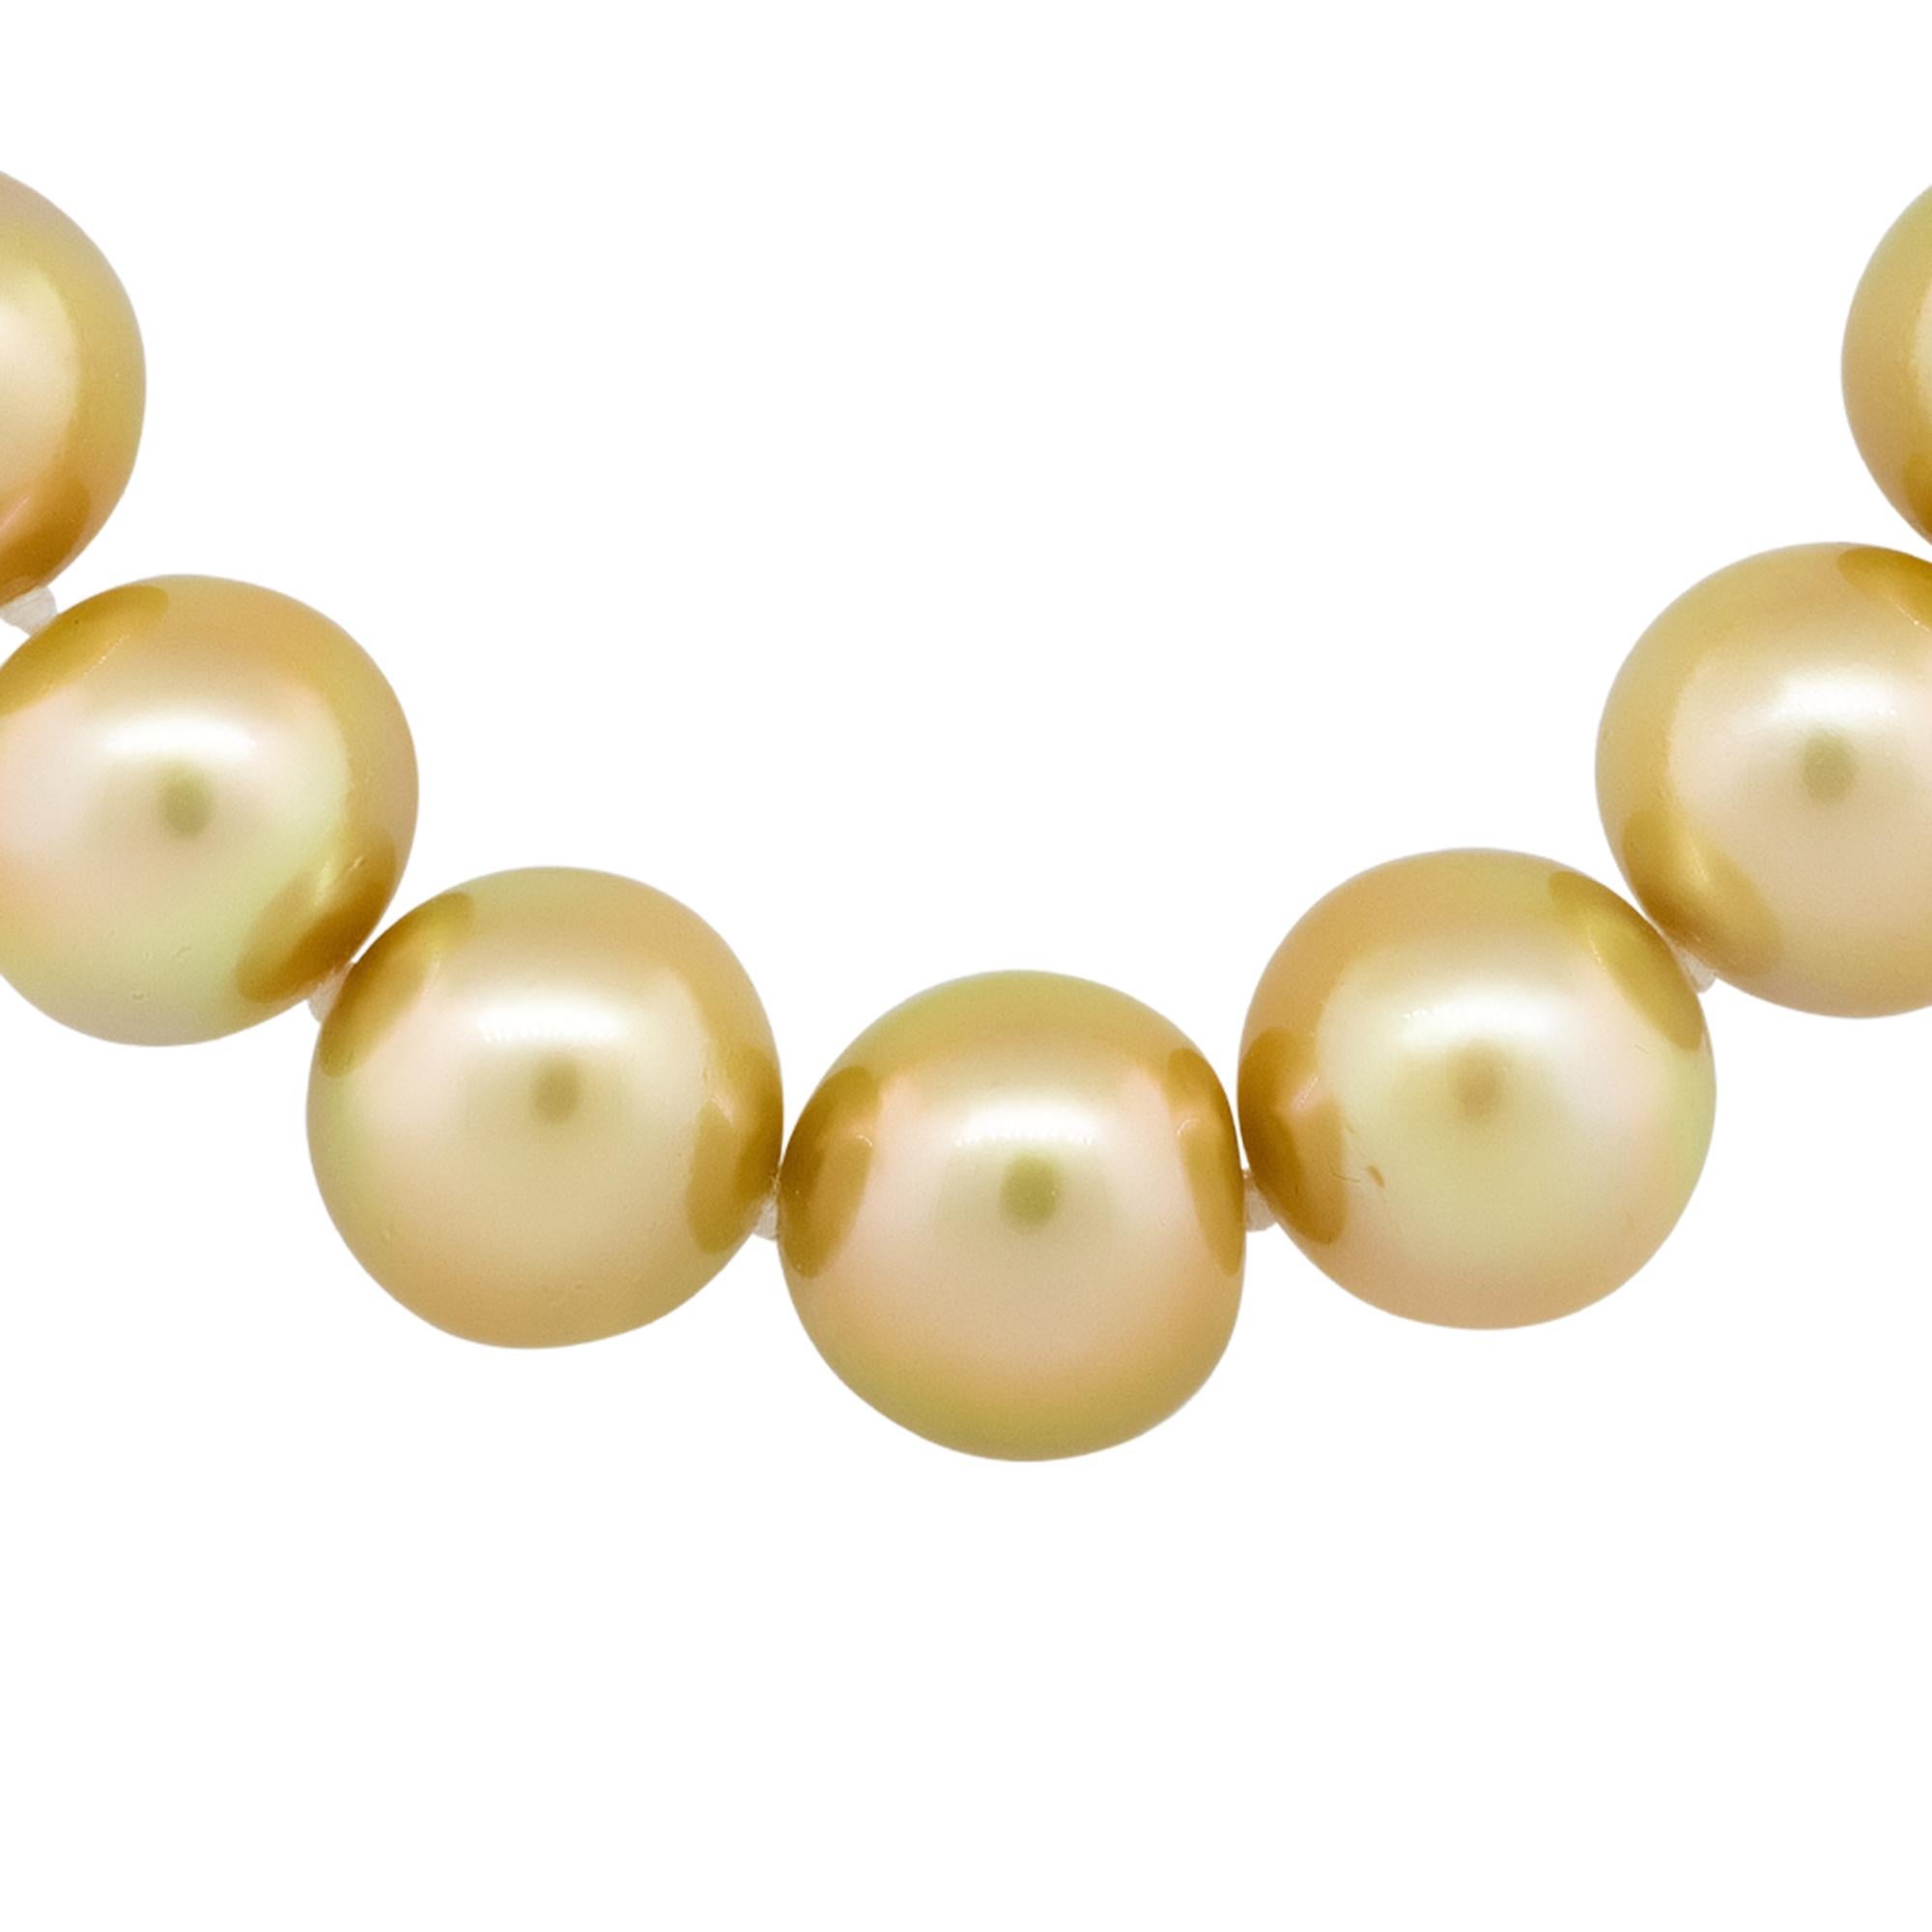 Material: 18k Yellow gold
Pearl Details: 33 South Sea pearls measuring approx. 13.75mm
Clasp: 18k yellow gold clasp with approx. 0.15ctw of round cut Diamonds. Diamonds are G/H in color and SI in clarity
Total Weight: 105.8g (68dwt)
Length: